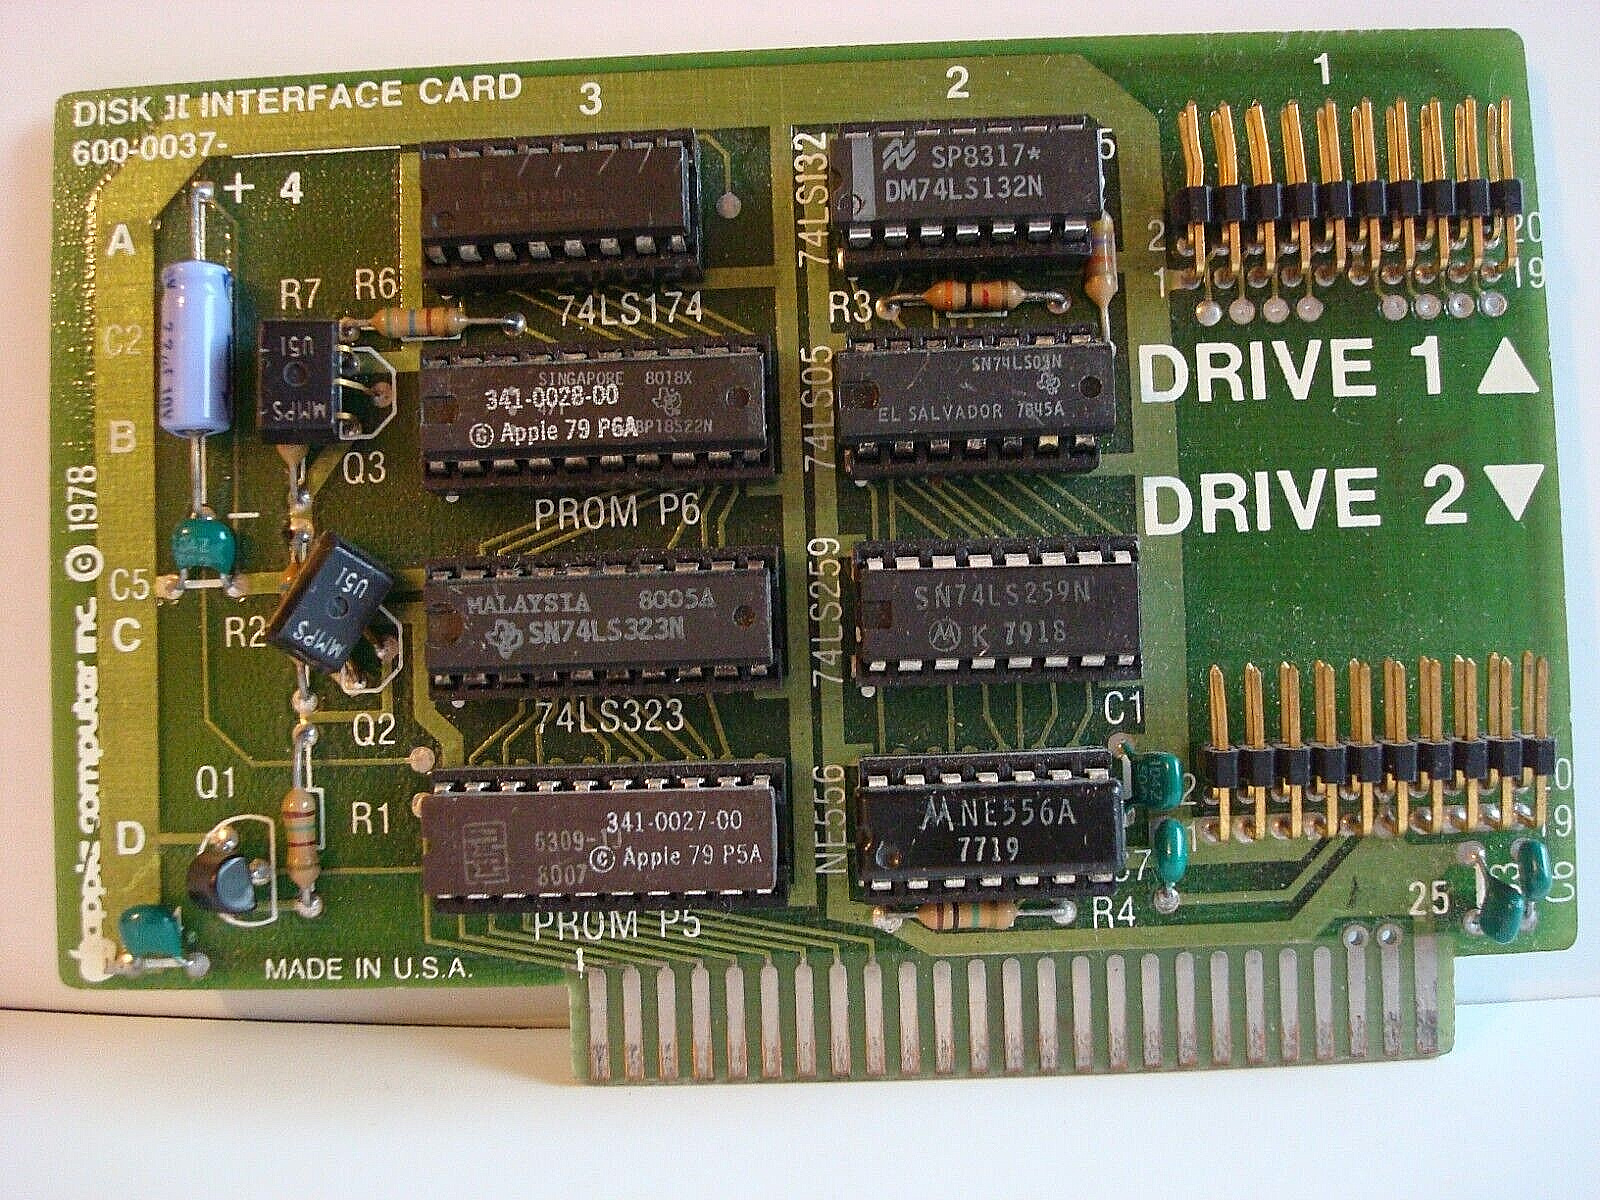 Apple II Disk II Interface Card 600-0037 Early 1978 Version – Tested and Working